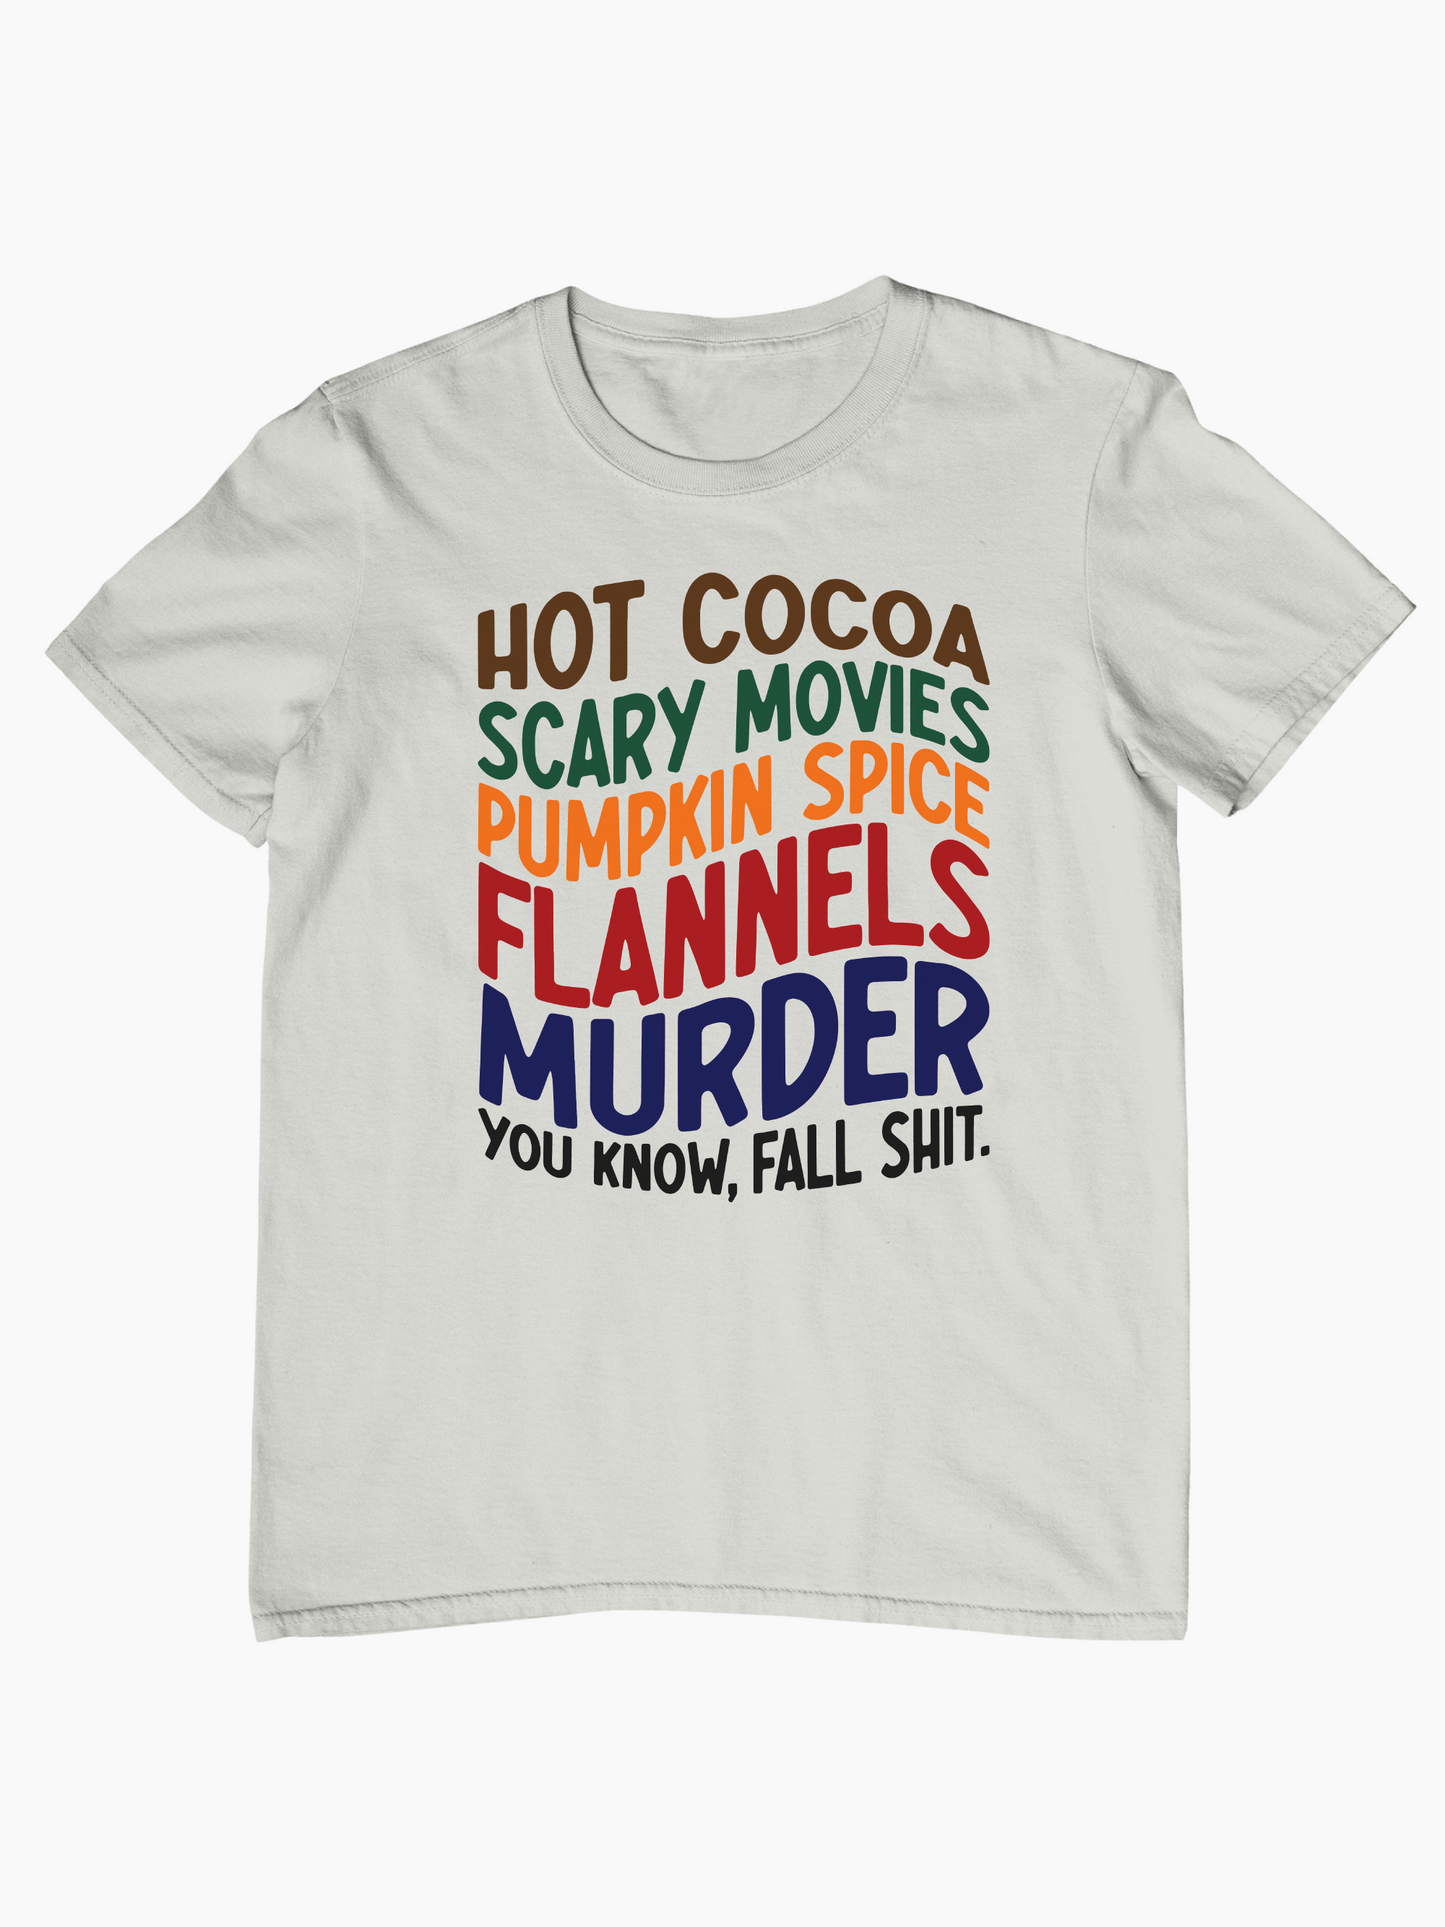 Hot Cocoa Scary Movies Pumpkin Spice Flannels Murder You Know, Fall Sh*t